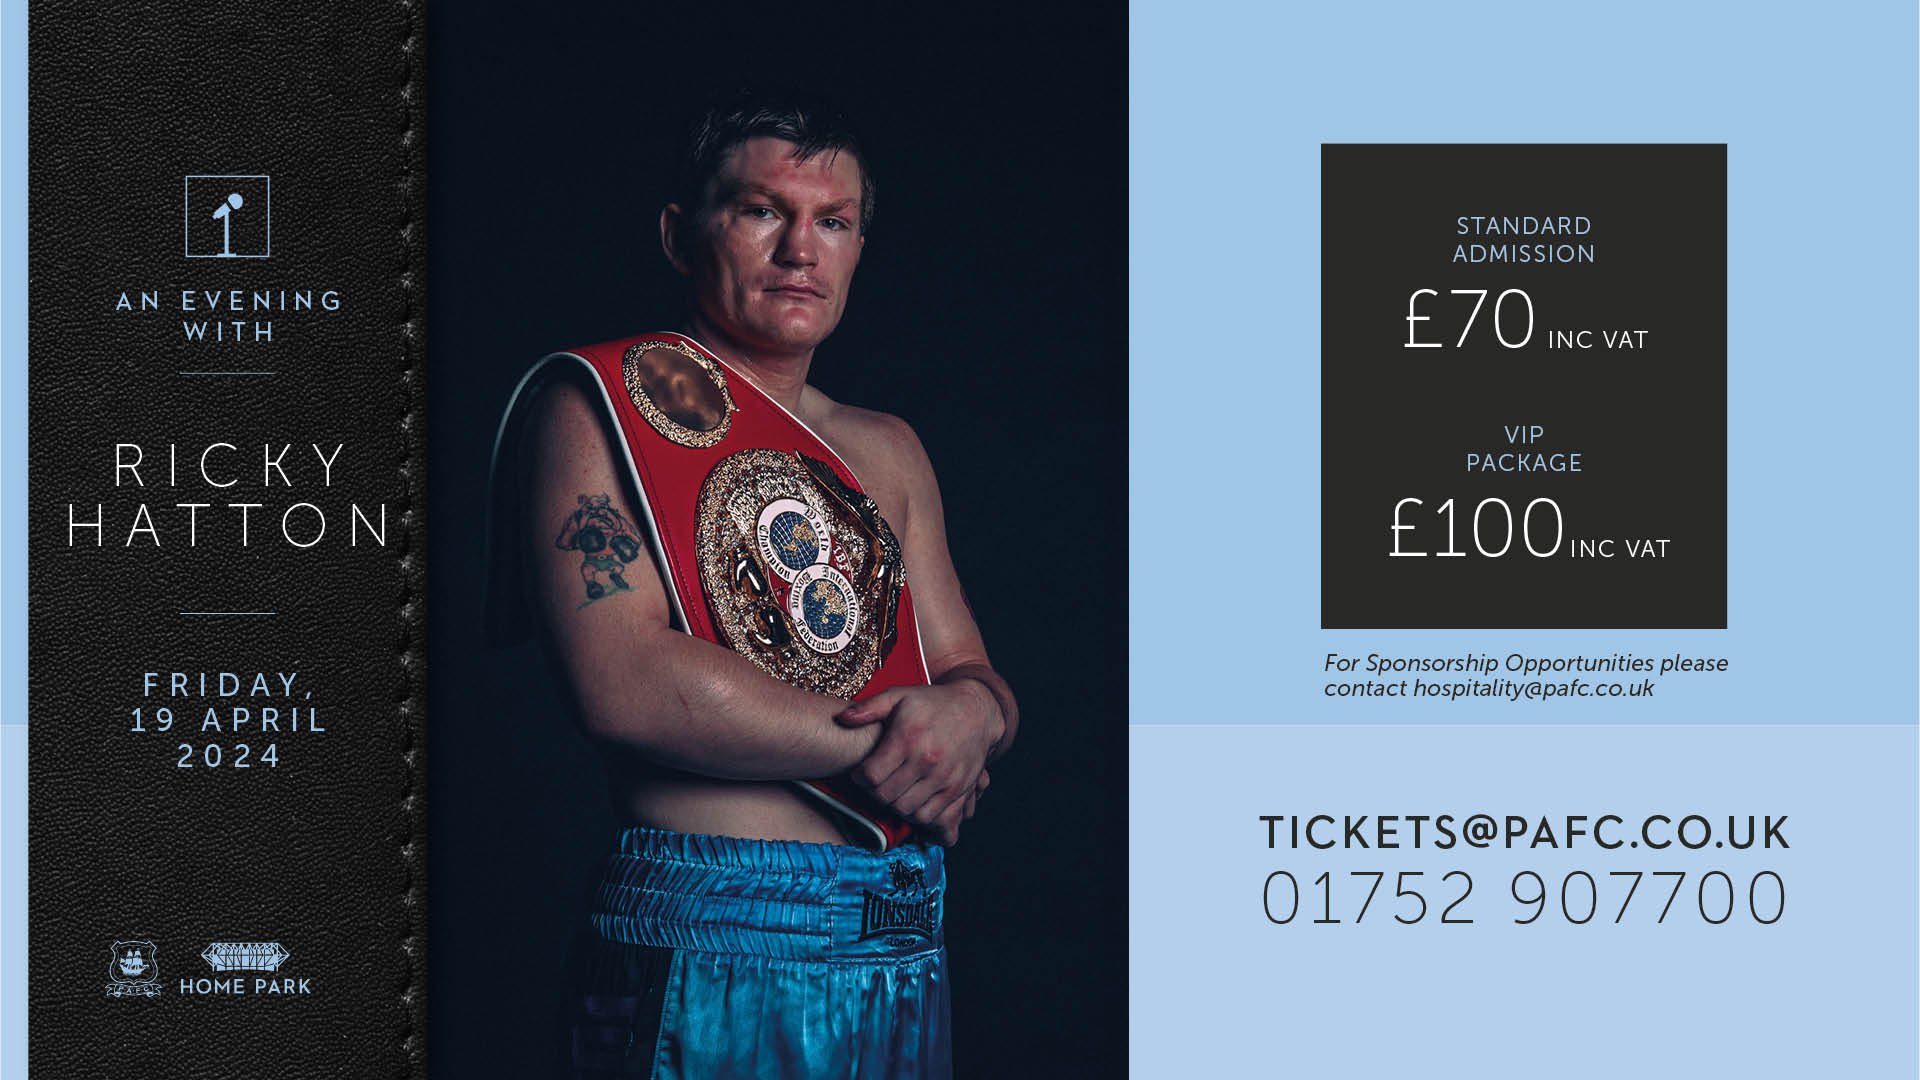 An evening with Ricky Hatton